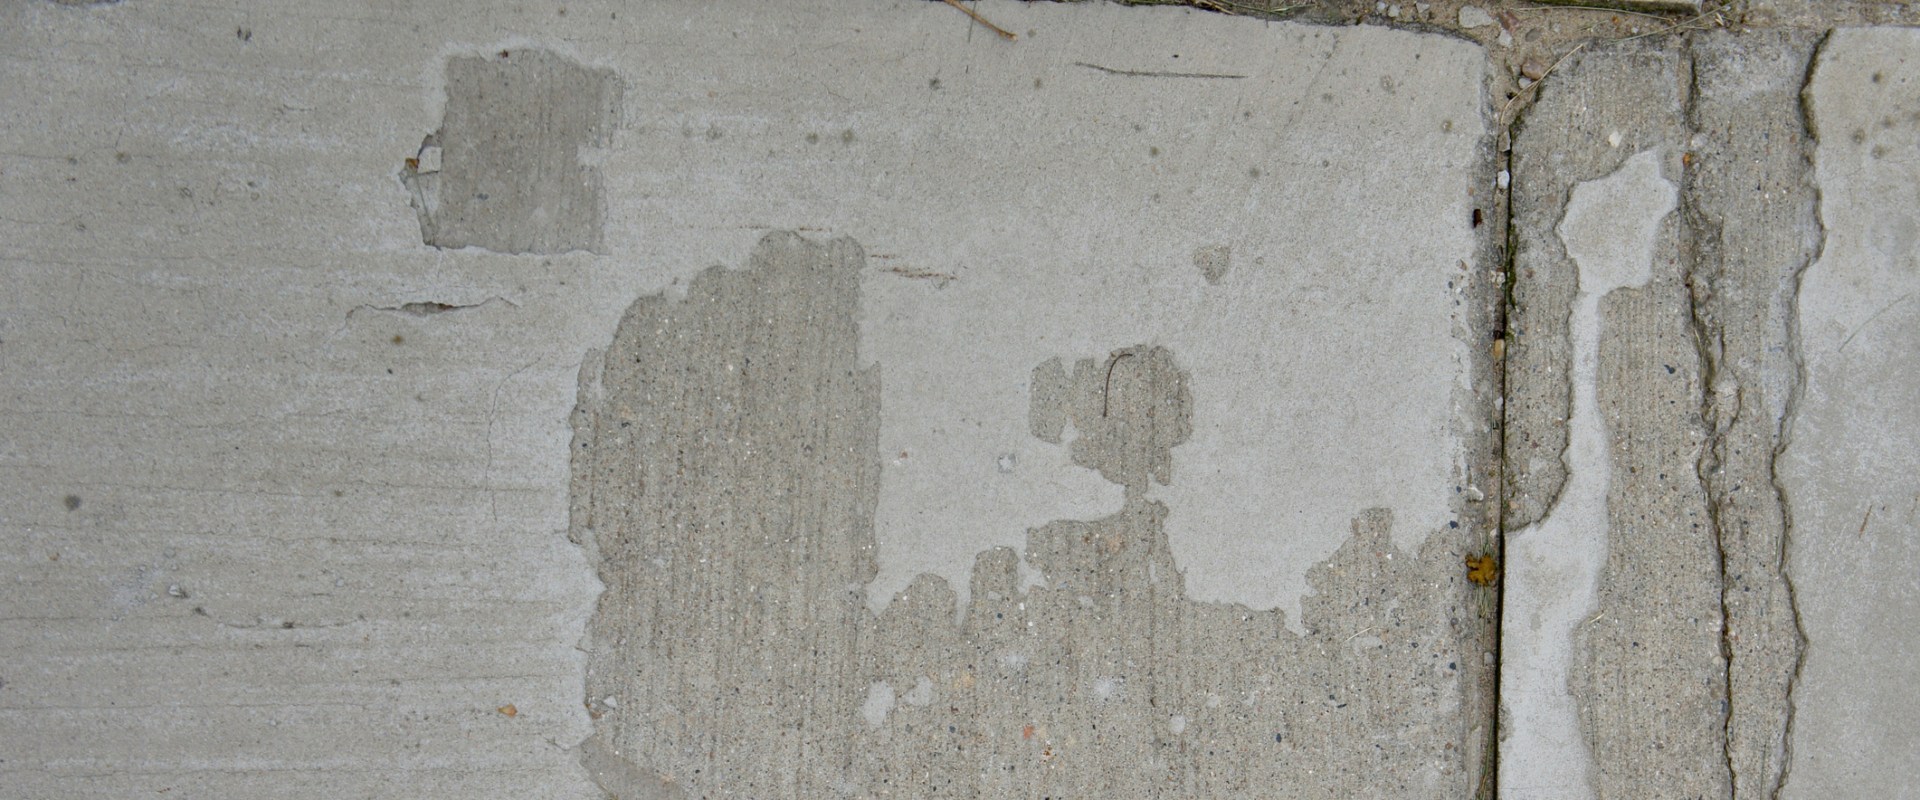 How to Identify and Repair Concrete Shedding